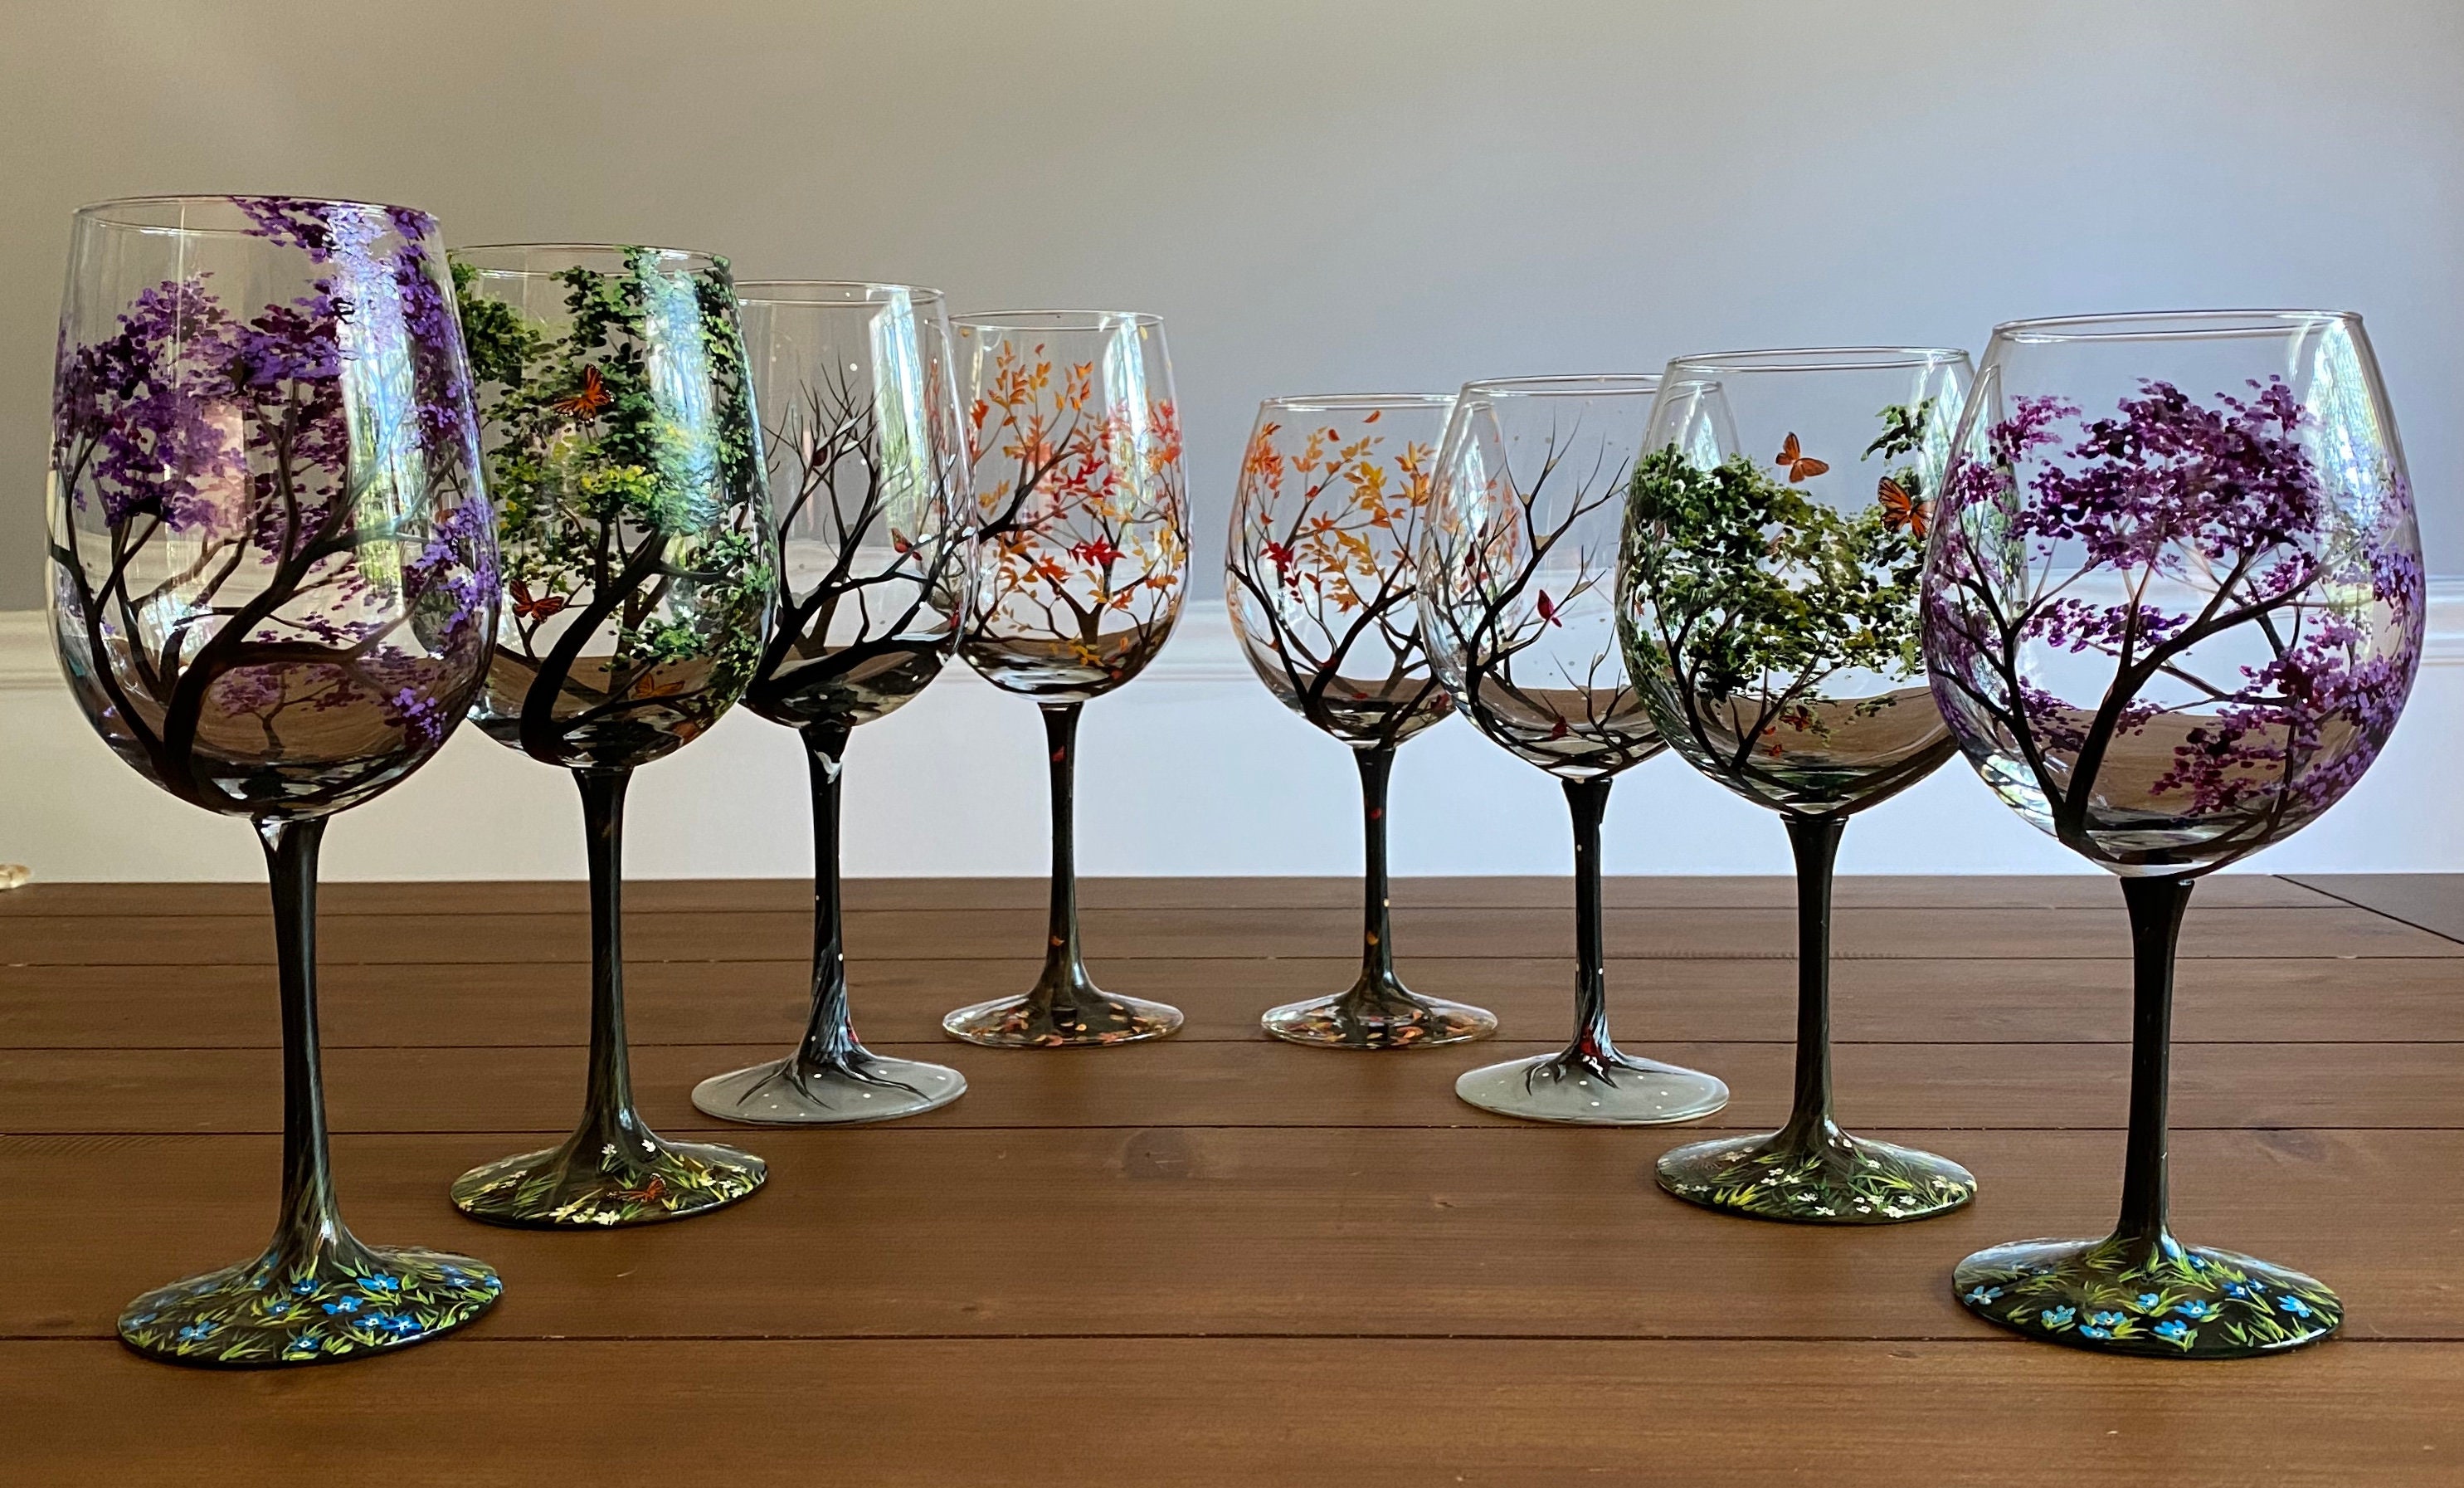 Autumn Wine Glass Set for Special Occasions - Daree's Designs